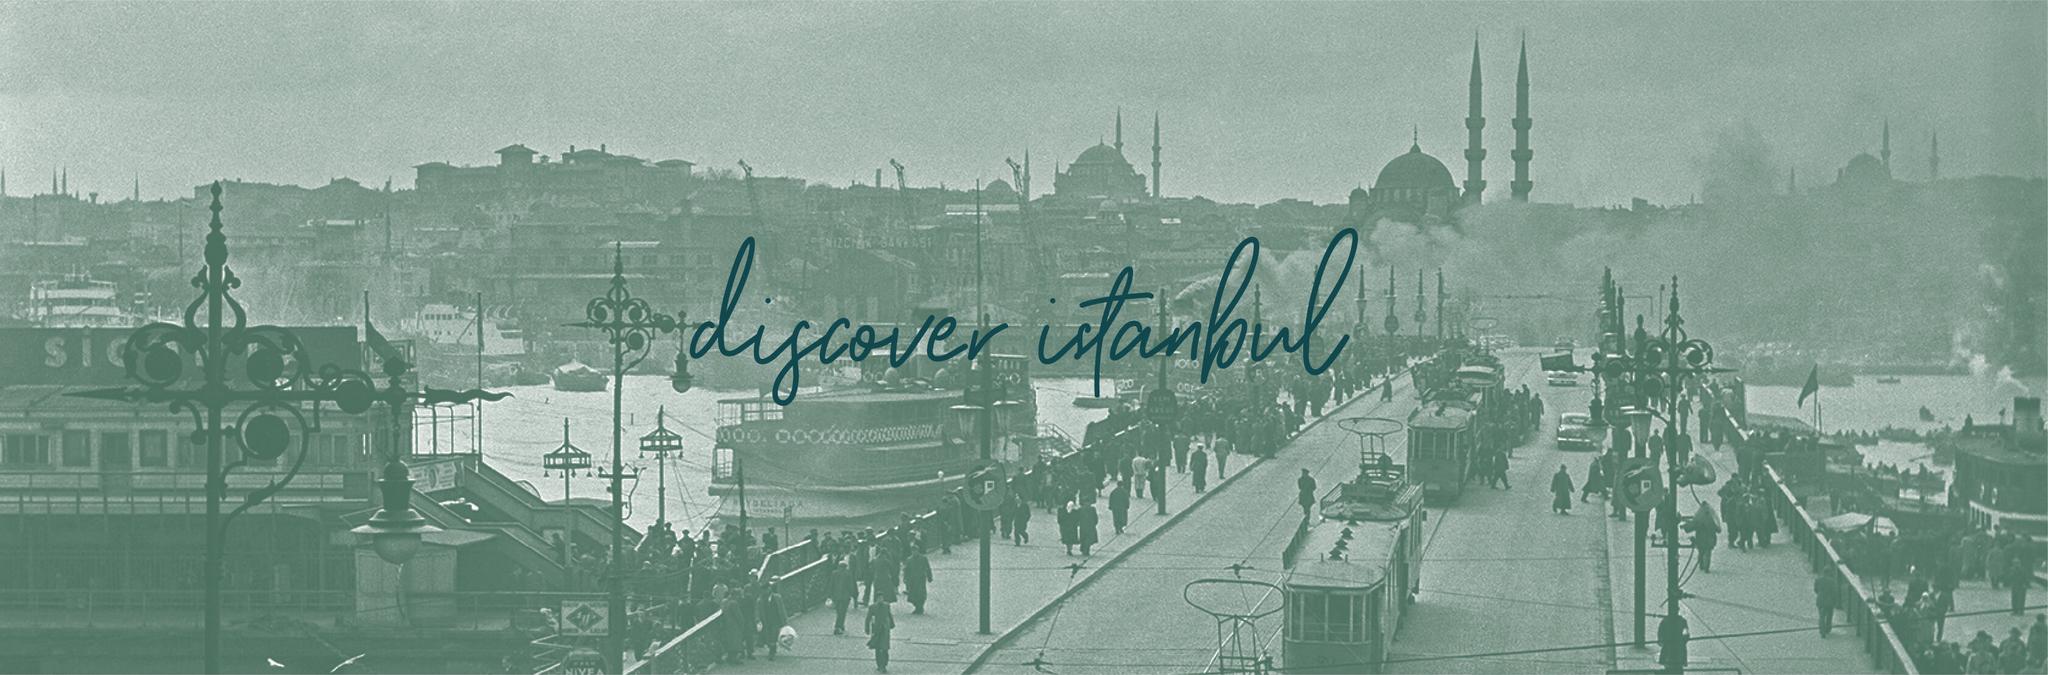 Discover istanbul image